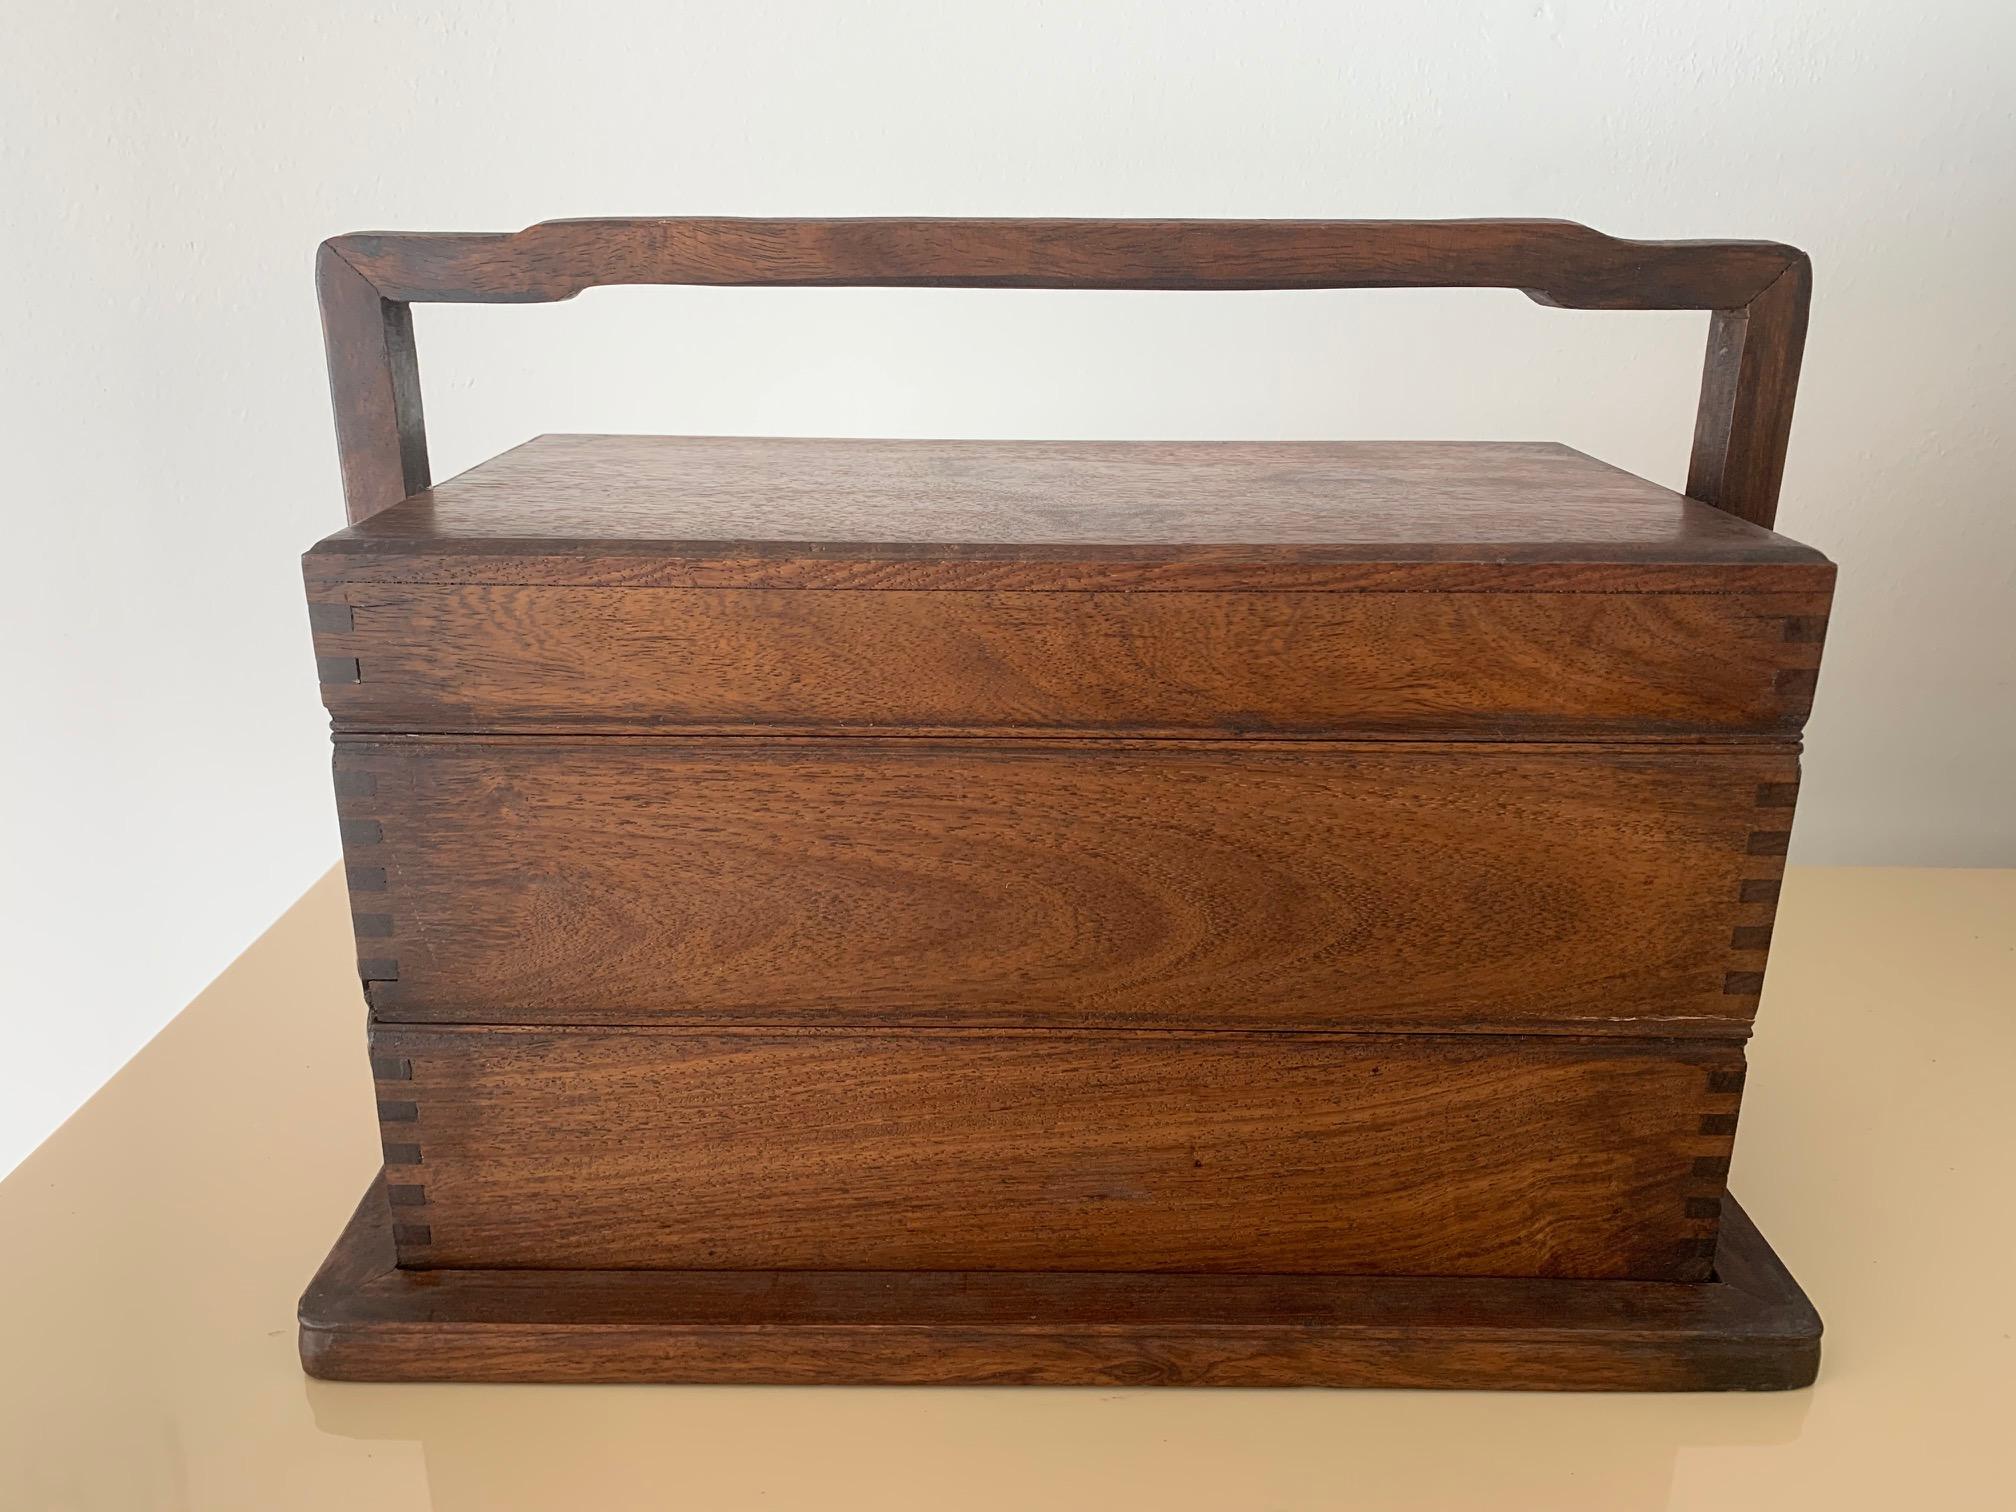 A Chinese Huanghuali picnic box with carrier frame featuring three removable stacking trays. It appears to be made with old Chinese rosewood (Huagnhuali) around 1950-1970s, possibly as diplomatic gift. The surface of the rose wood features